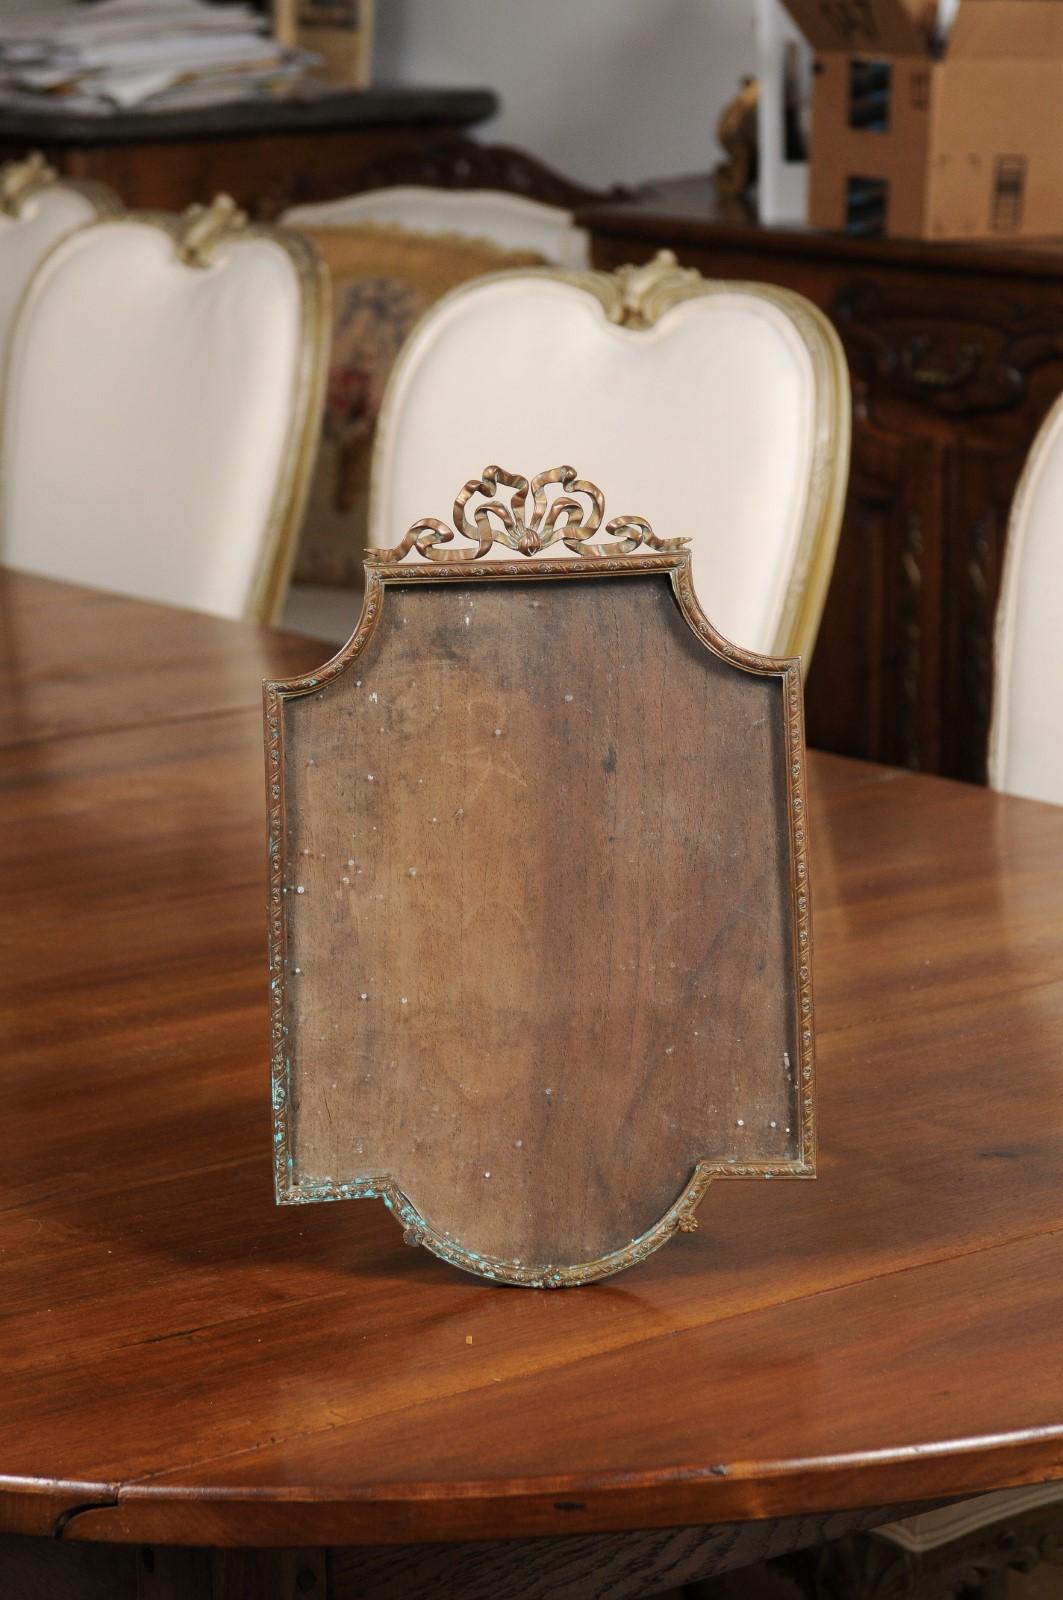 A French bronze picture frame from the 19th century, with bow motif. Created in France during the 19th century, this bronze piece is adorned with a delicate bow on the crest, sitting on a rectangular frame with in-curving accents in the upper